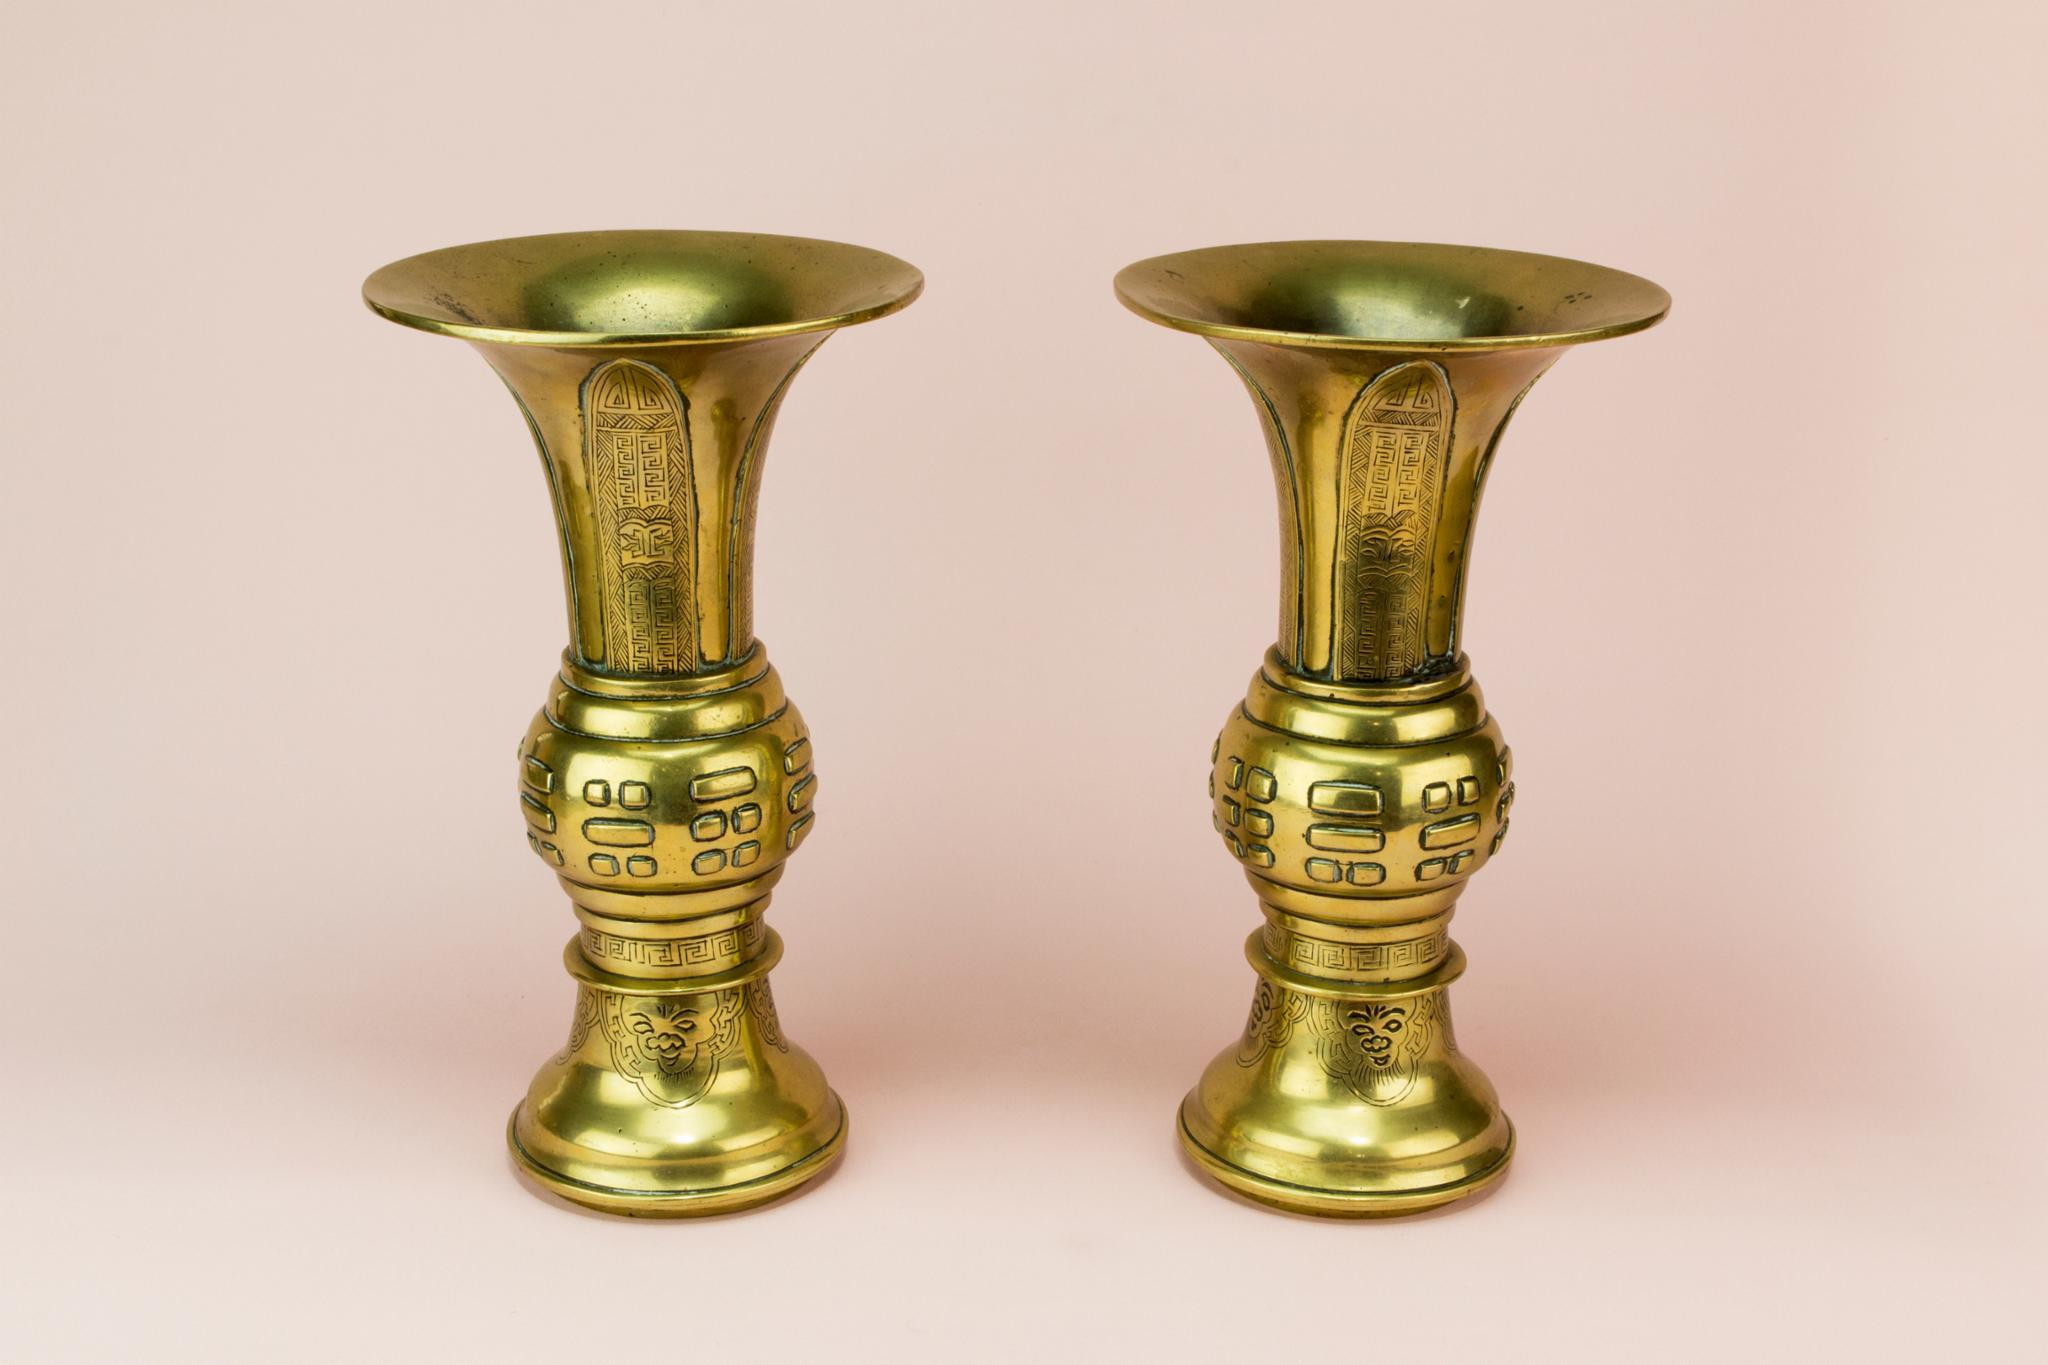 30 attractive Sterling Silver Vase Engraved 2024 free download sterling silver vase engraved of 2 gu shaped brass vases chinese 19th century late 19th century with 2 gu shaped brass vases chinese 19th century